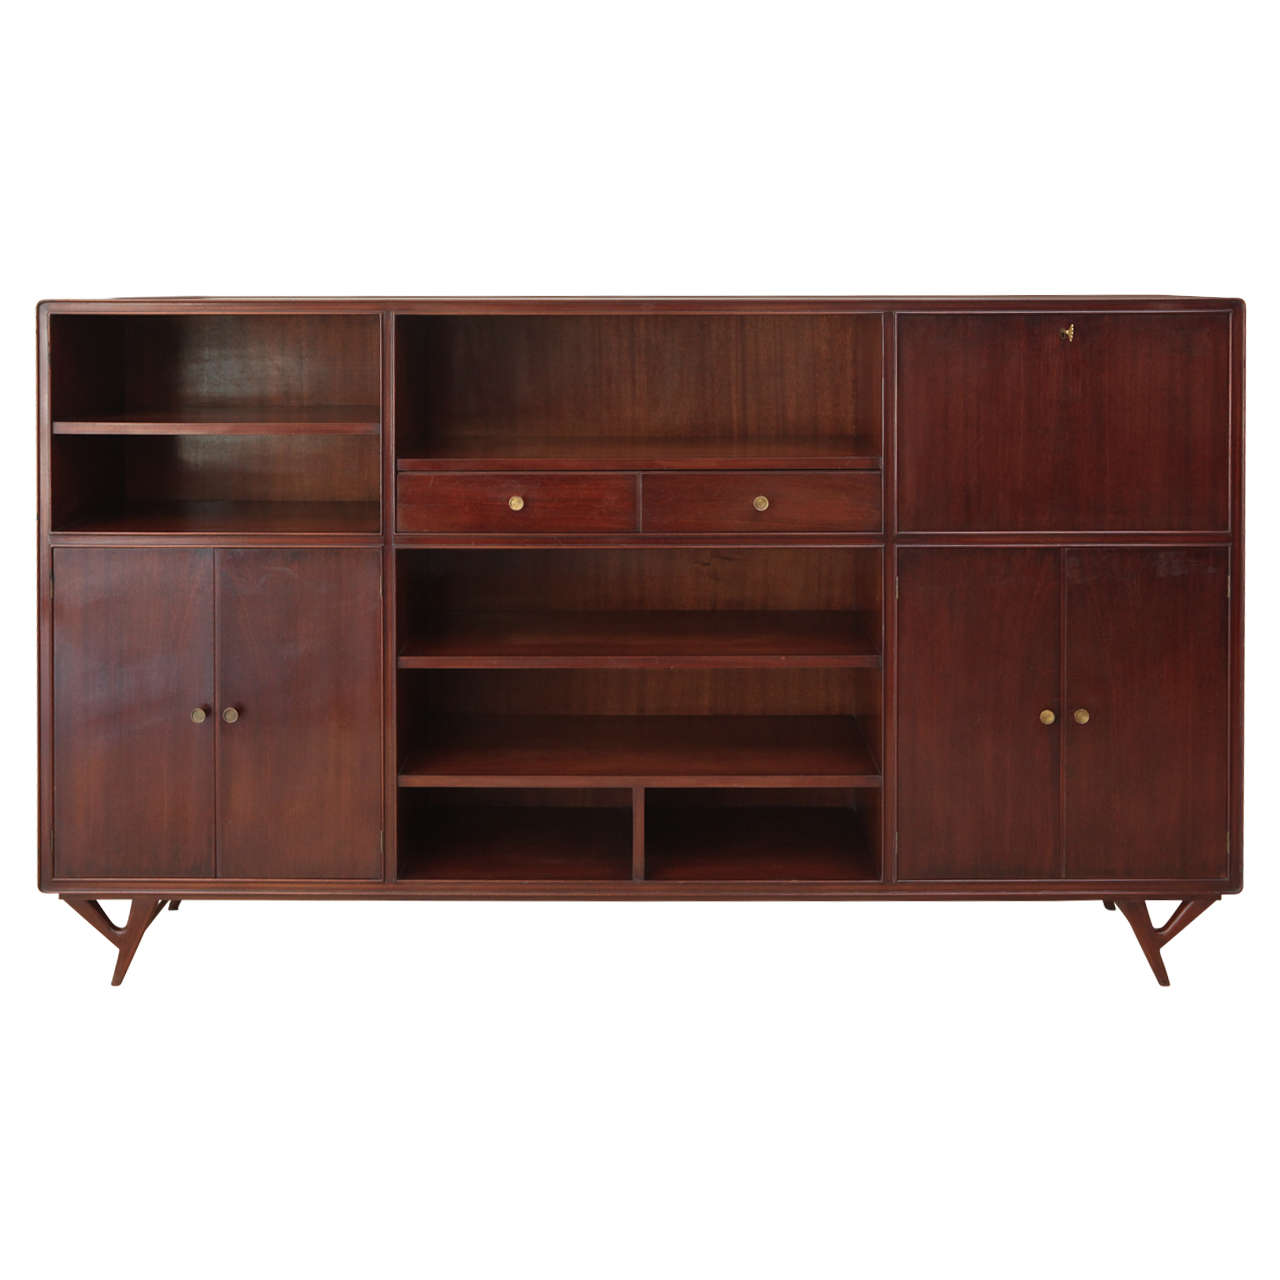 Italian Mid-Century Modern Mahogany Sideboard in the Manner of Ico Parisi